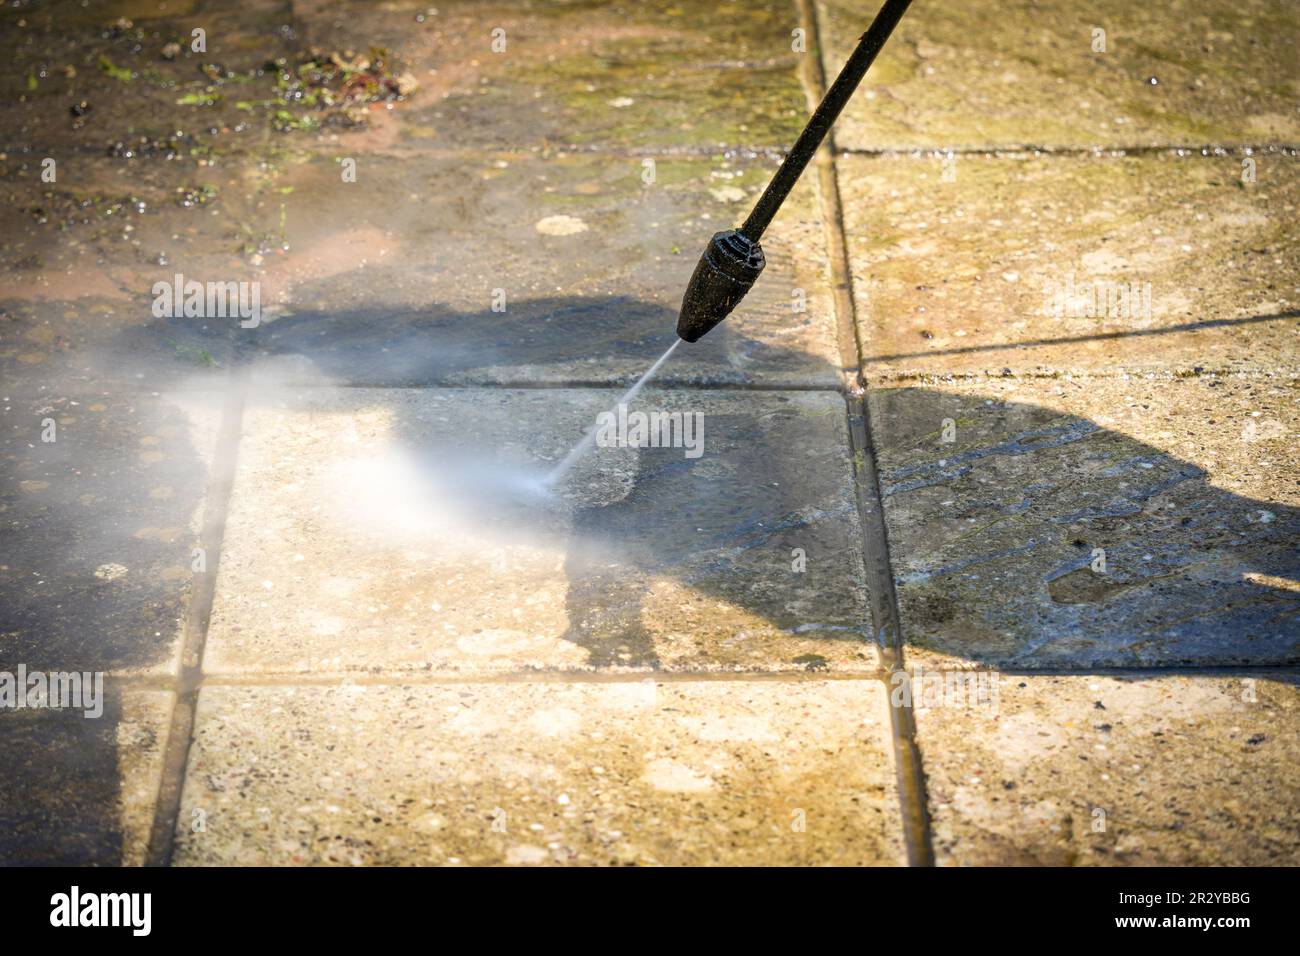 Pressure washer (Power jet ) cleaning off grime from a patio pavestone Stock Photo